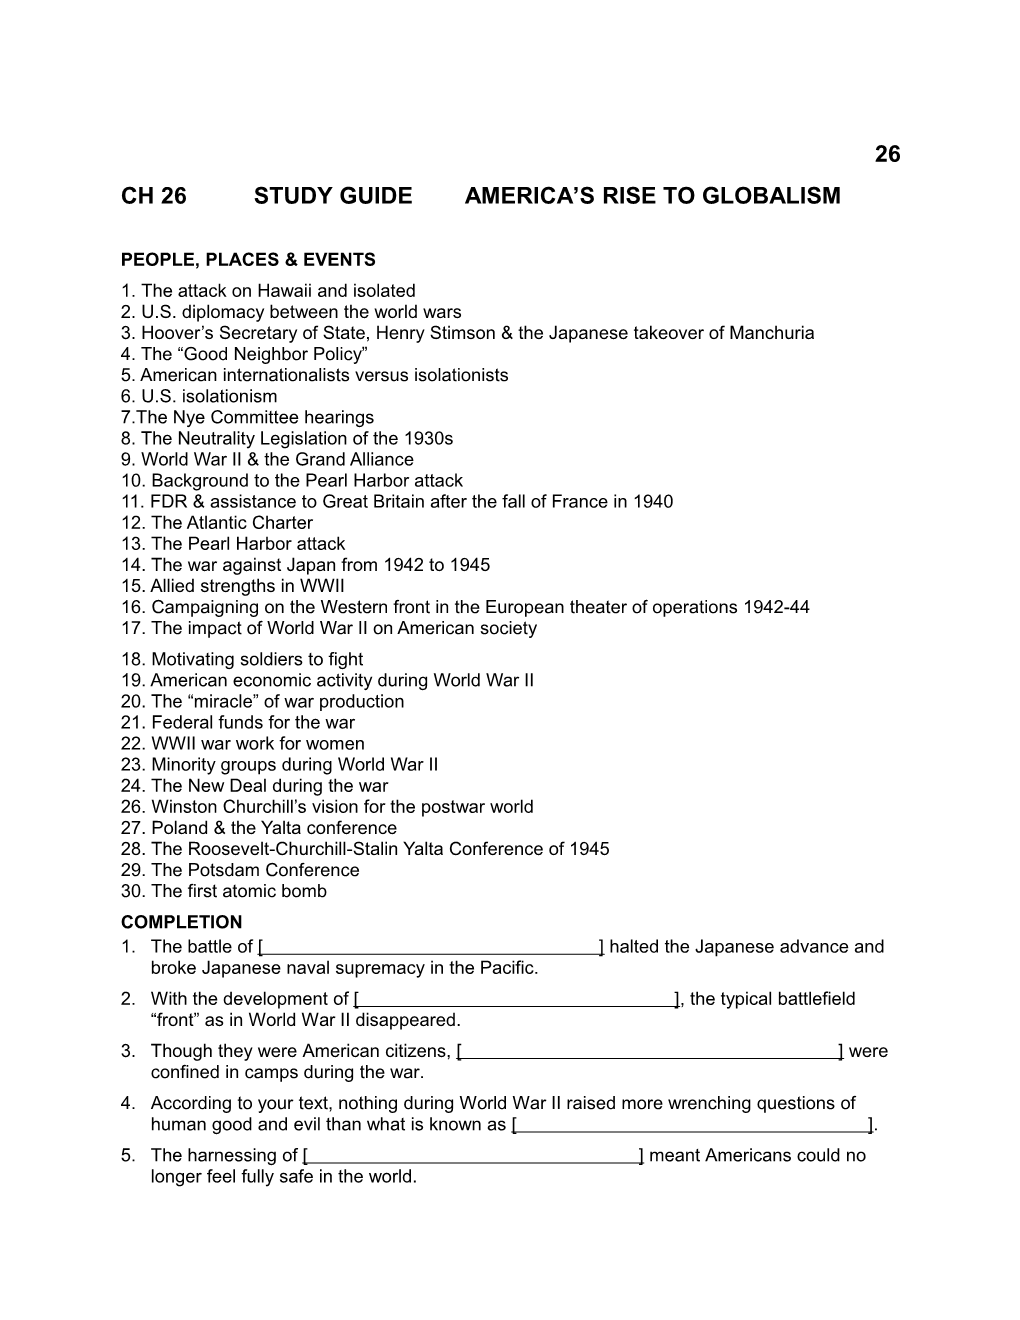 Ch 26 Study Guide America S Rise to Globalism